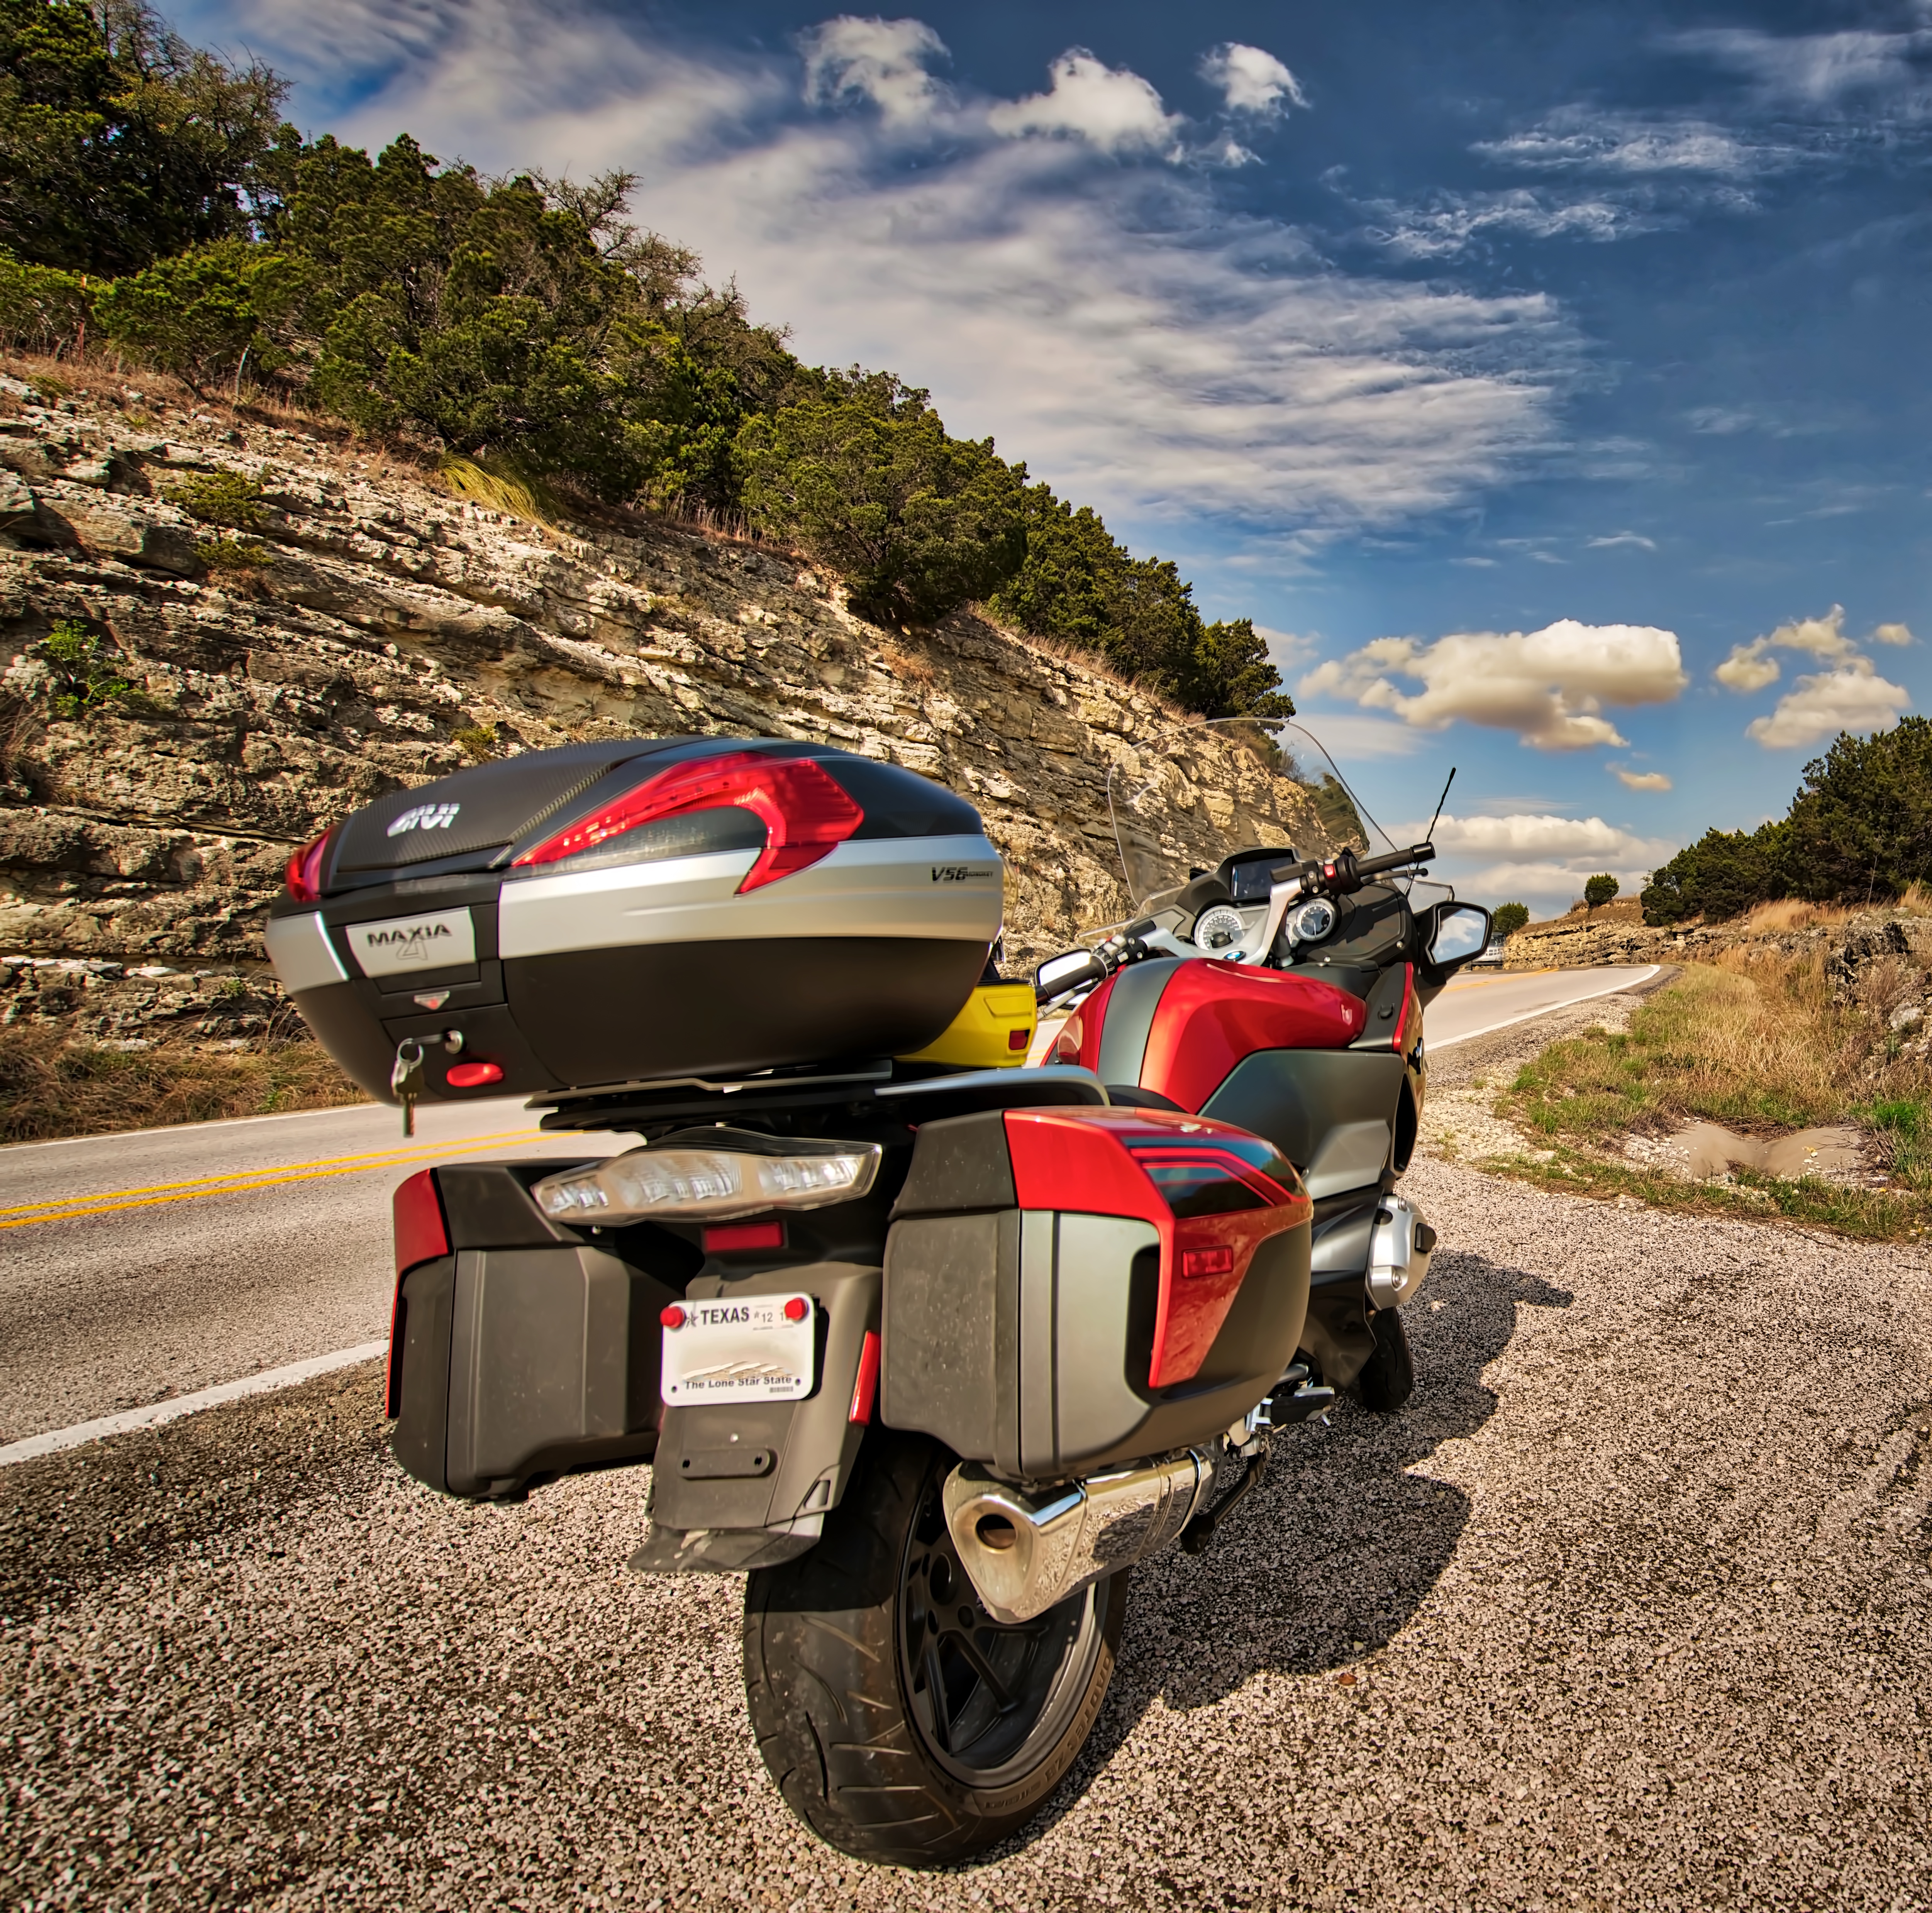 Hill Country Ride, A7r2, BMW, Country, HDR, HQ Photo